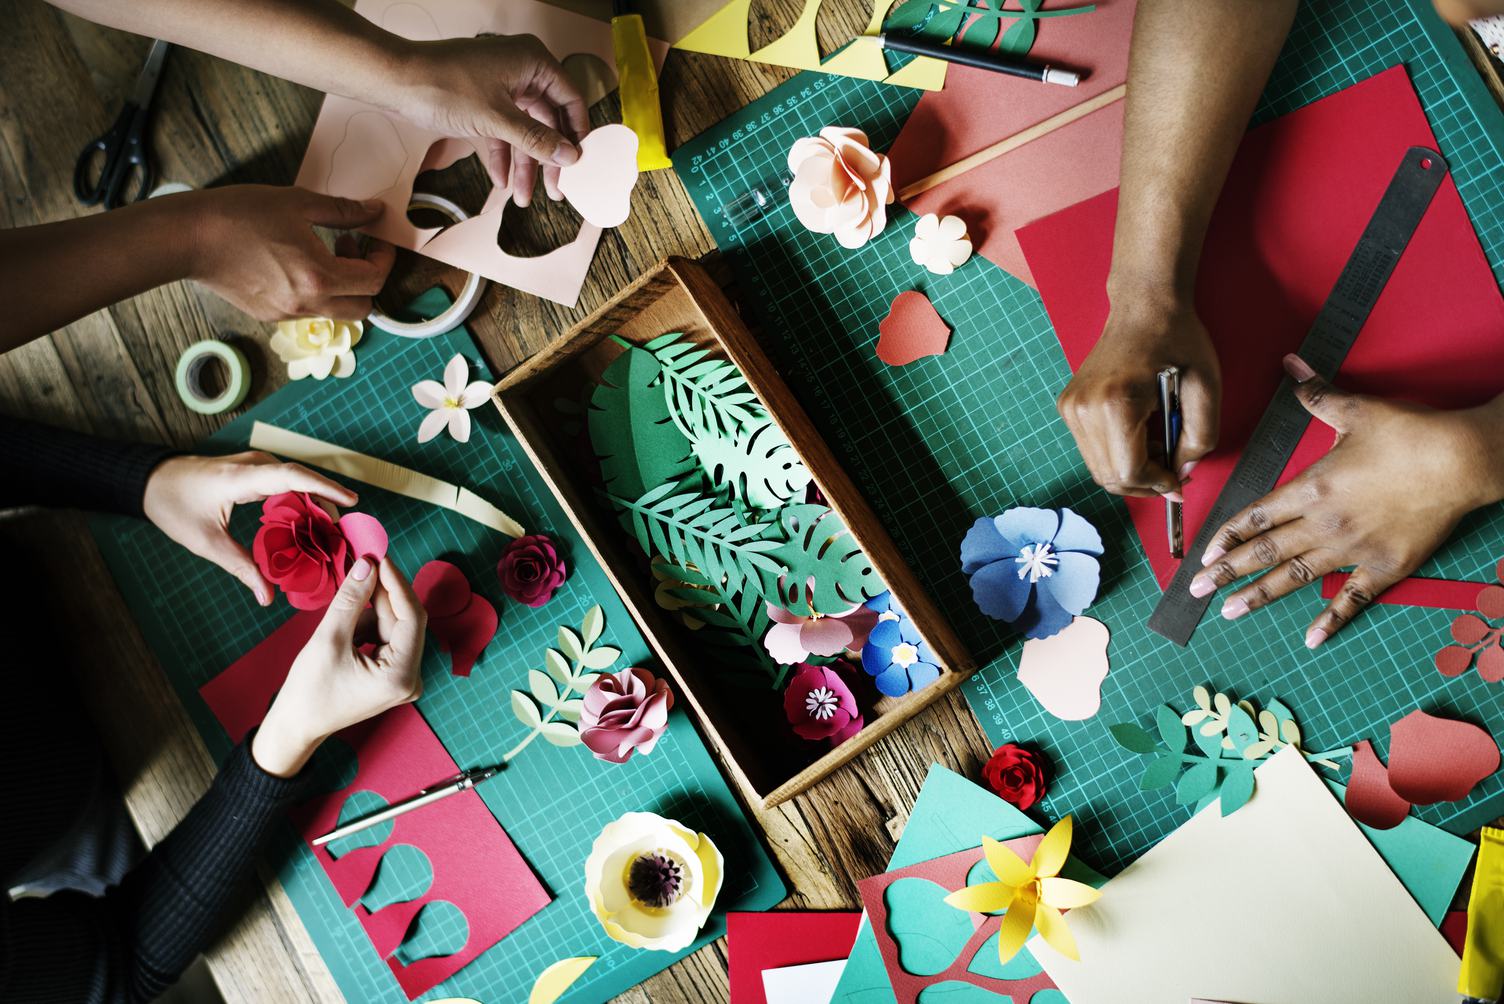 Creative Crafts - Making Paper Flowers